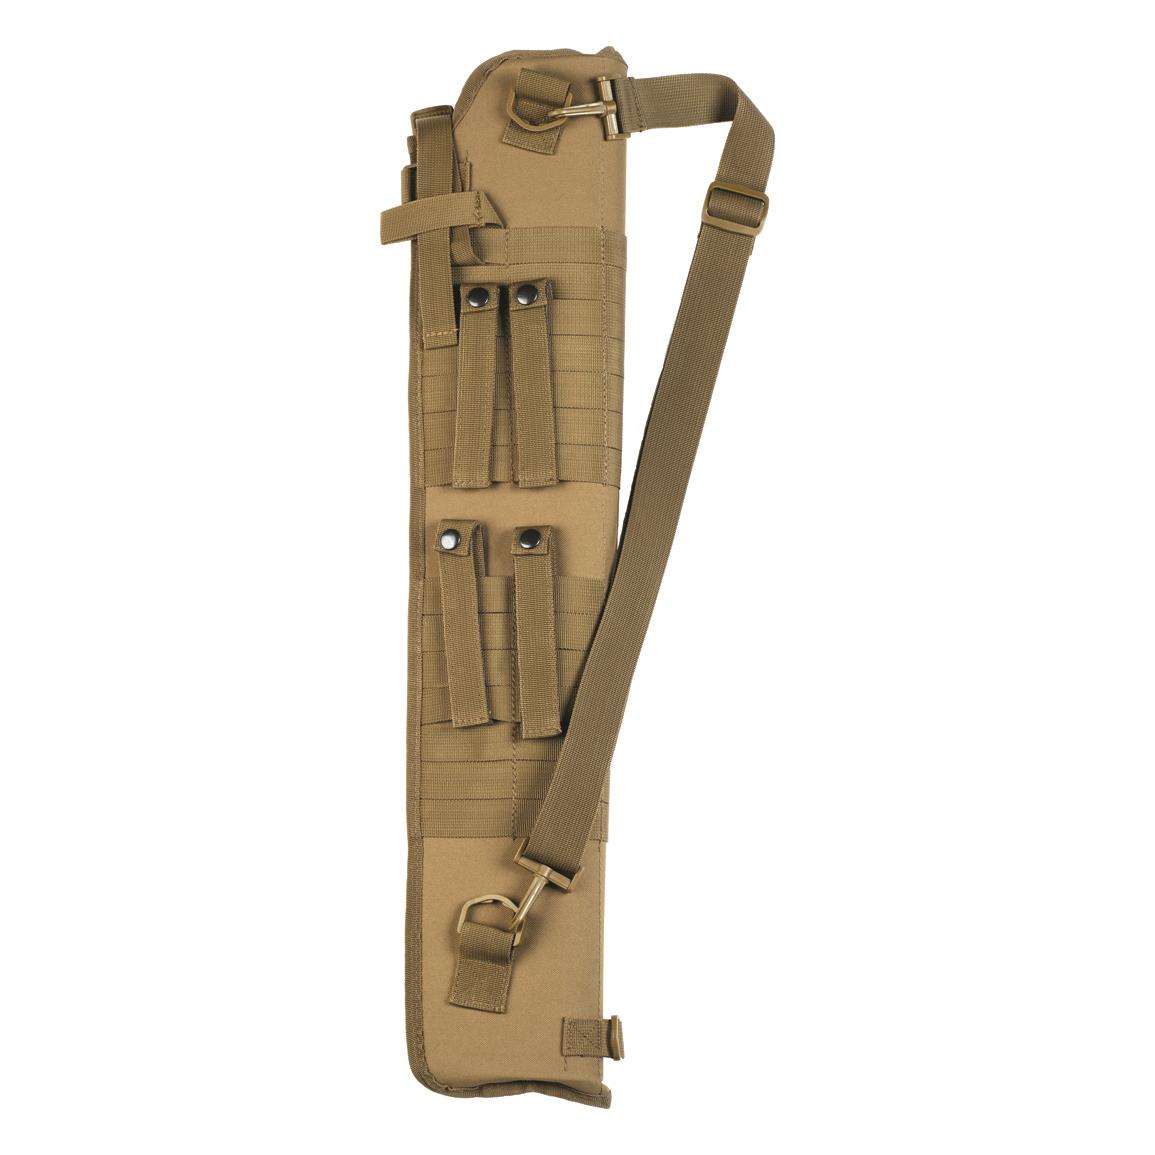 Shoulder strap and MOLLE attachment to packs or other compatible surfaces